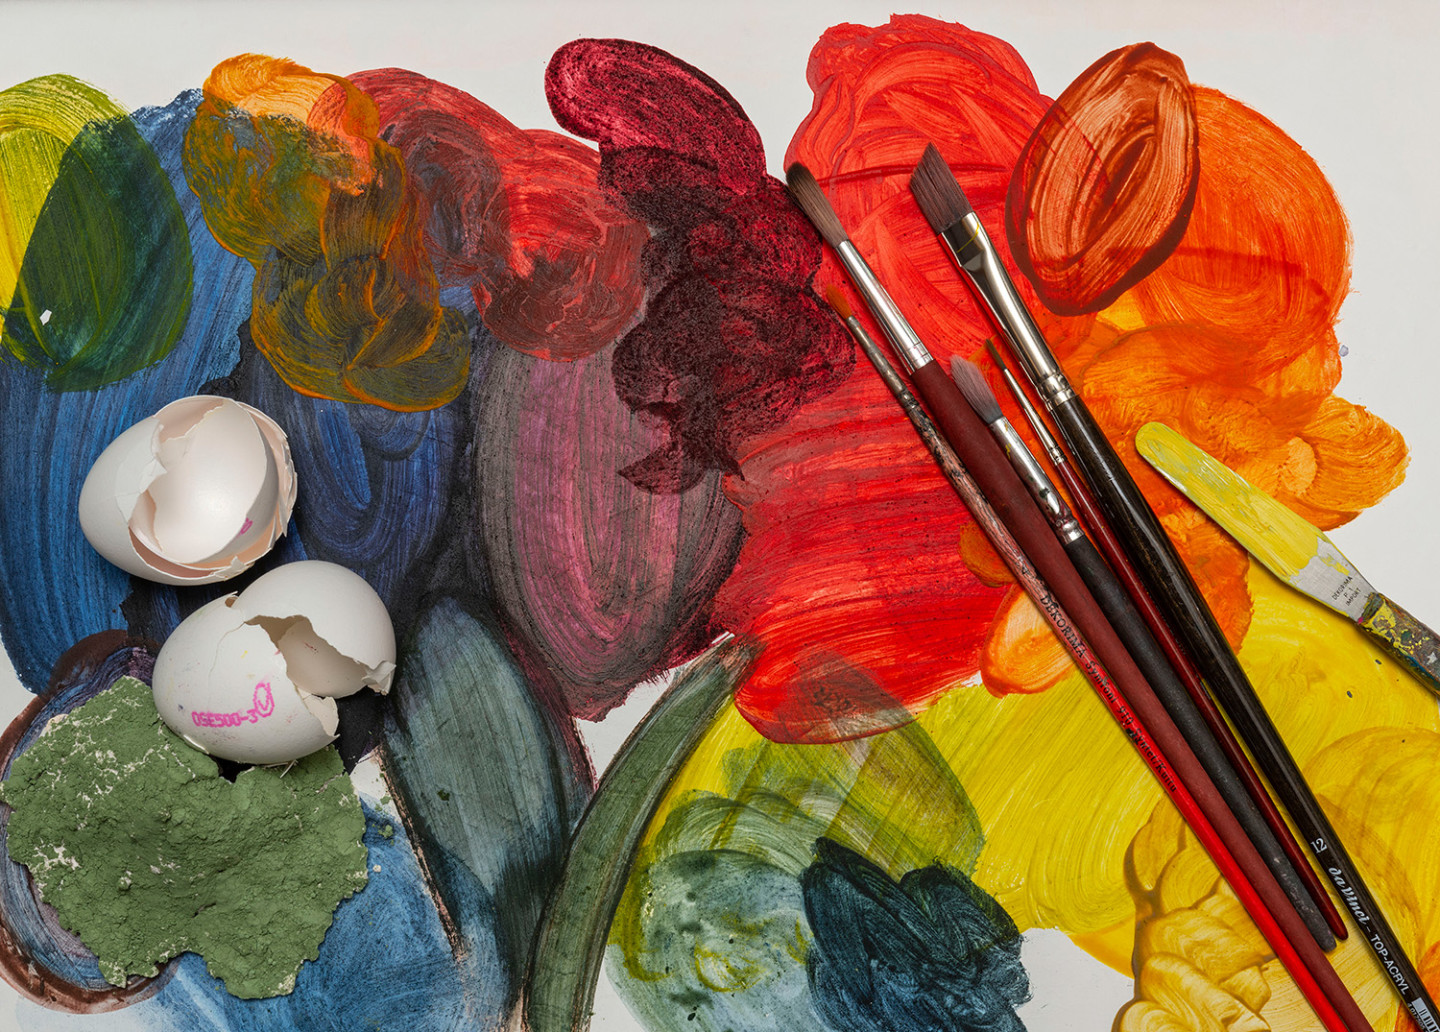 Tempera painting, different colors: green, yellow, red. Paintbrushes and a cracked egg.